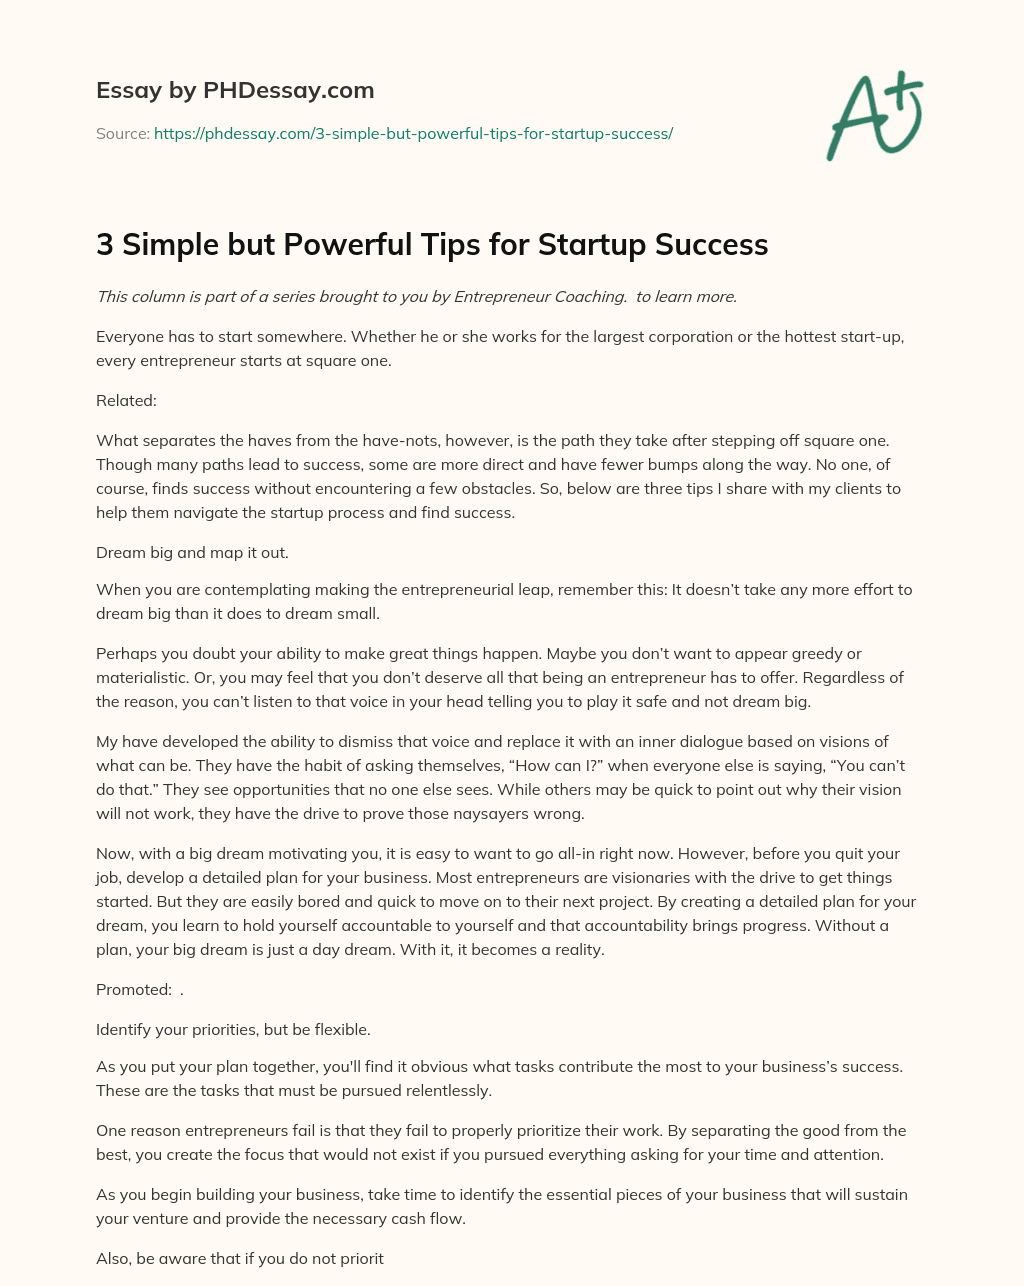 3 Simple but Powerful Tips for Startup Success essay